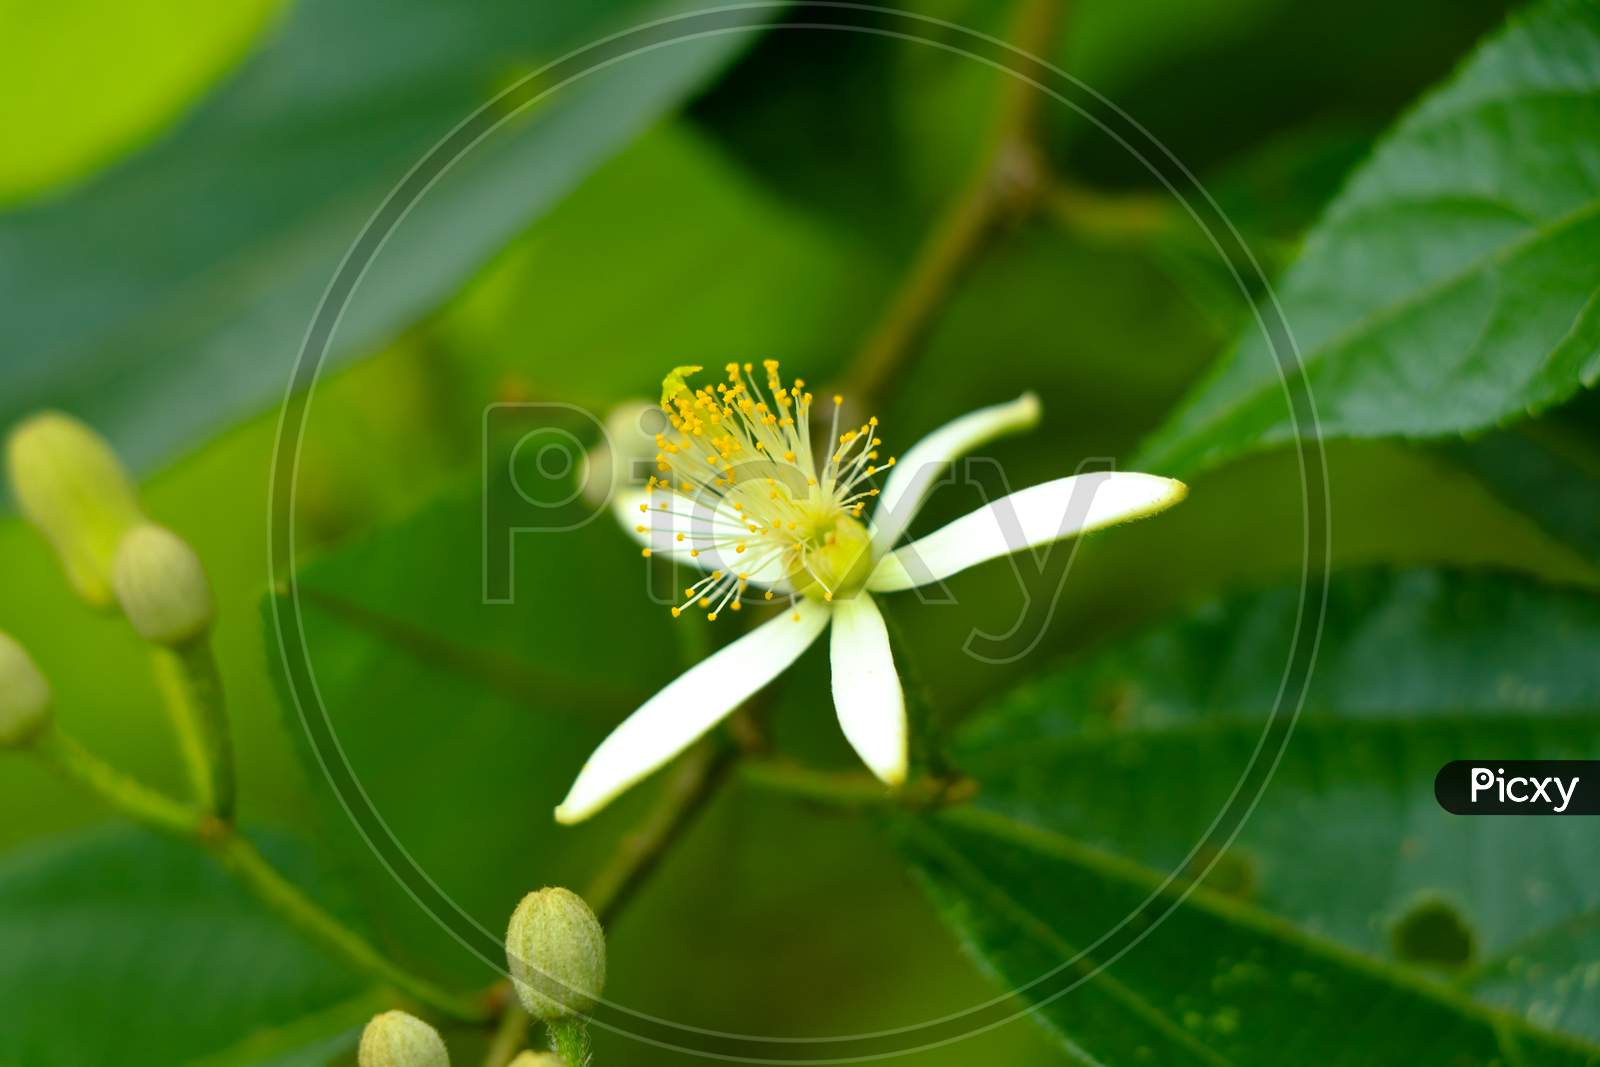 White Color Flowers Of Grewia Laevigata  Tree In The Malvaceae Family